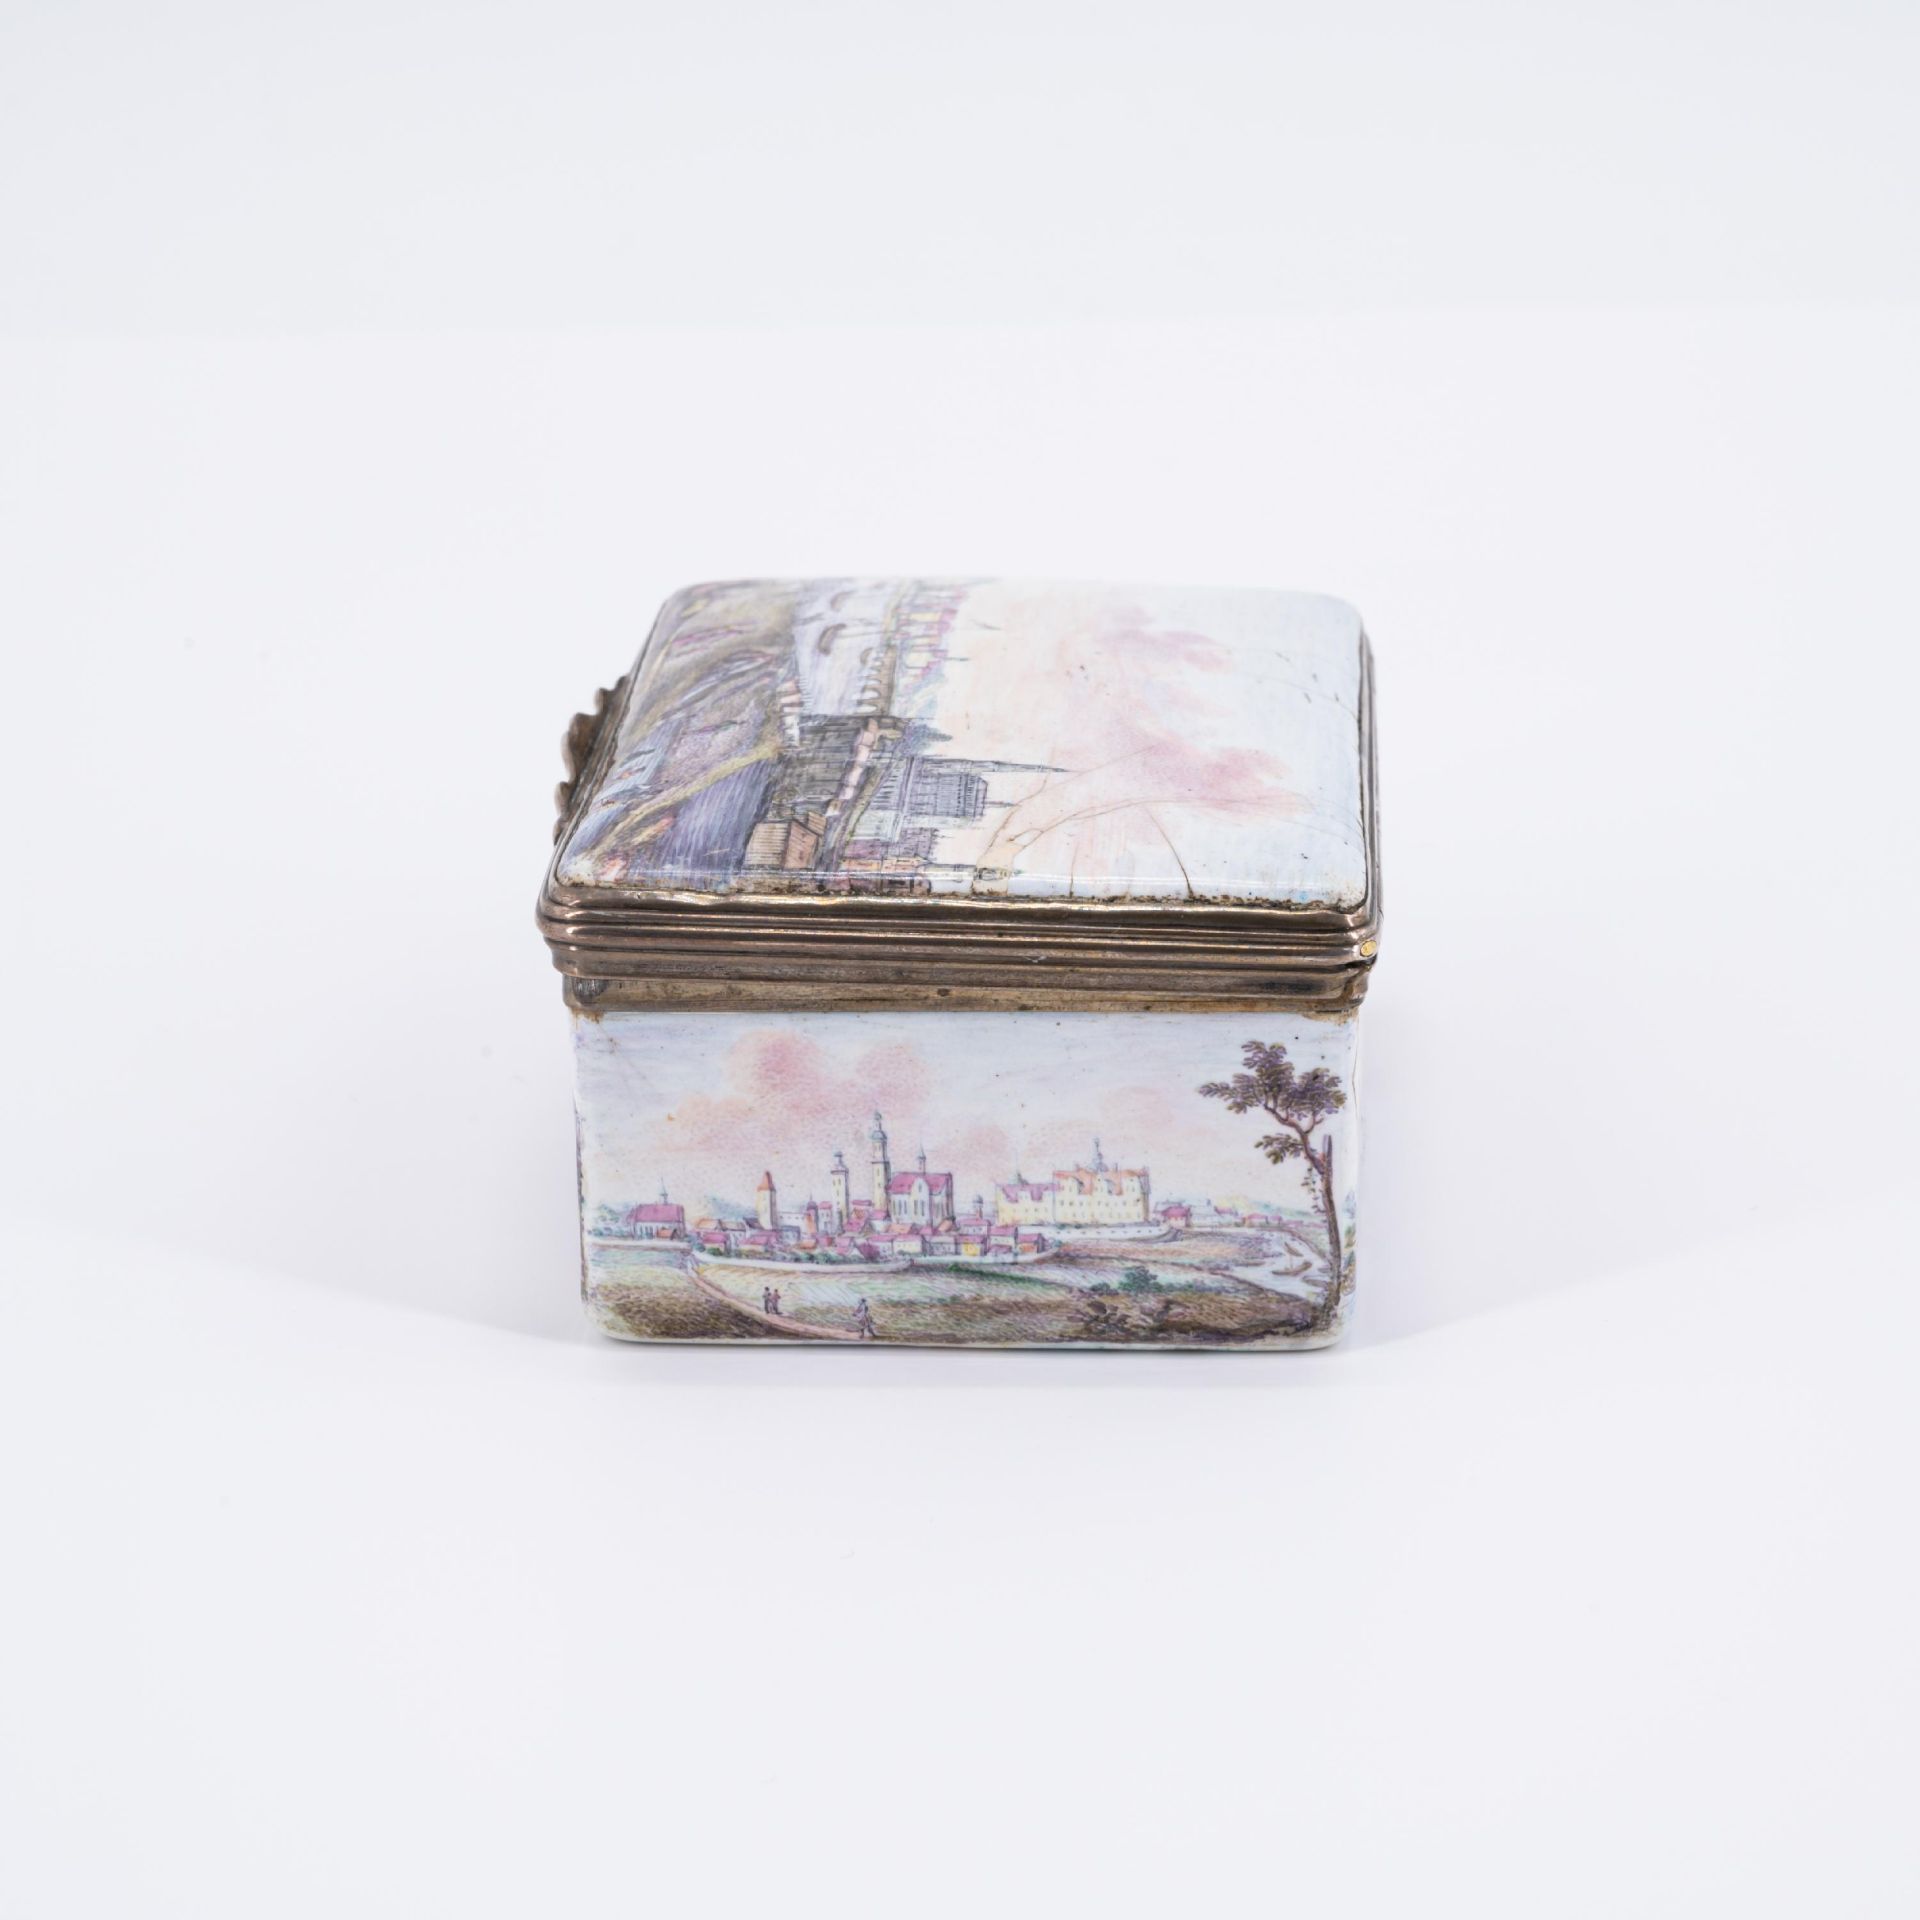 Snuff box with landscape views of Albertine Saxony - Image 4 of 7